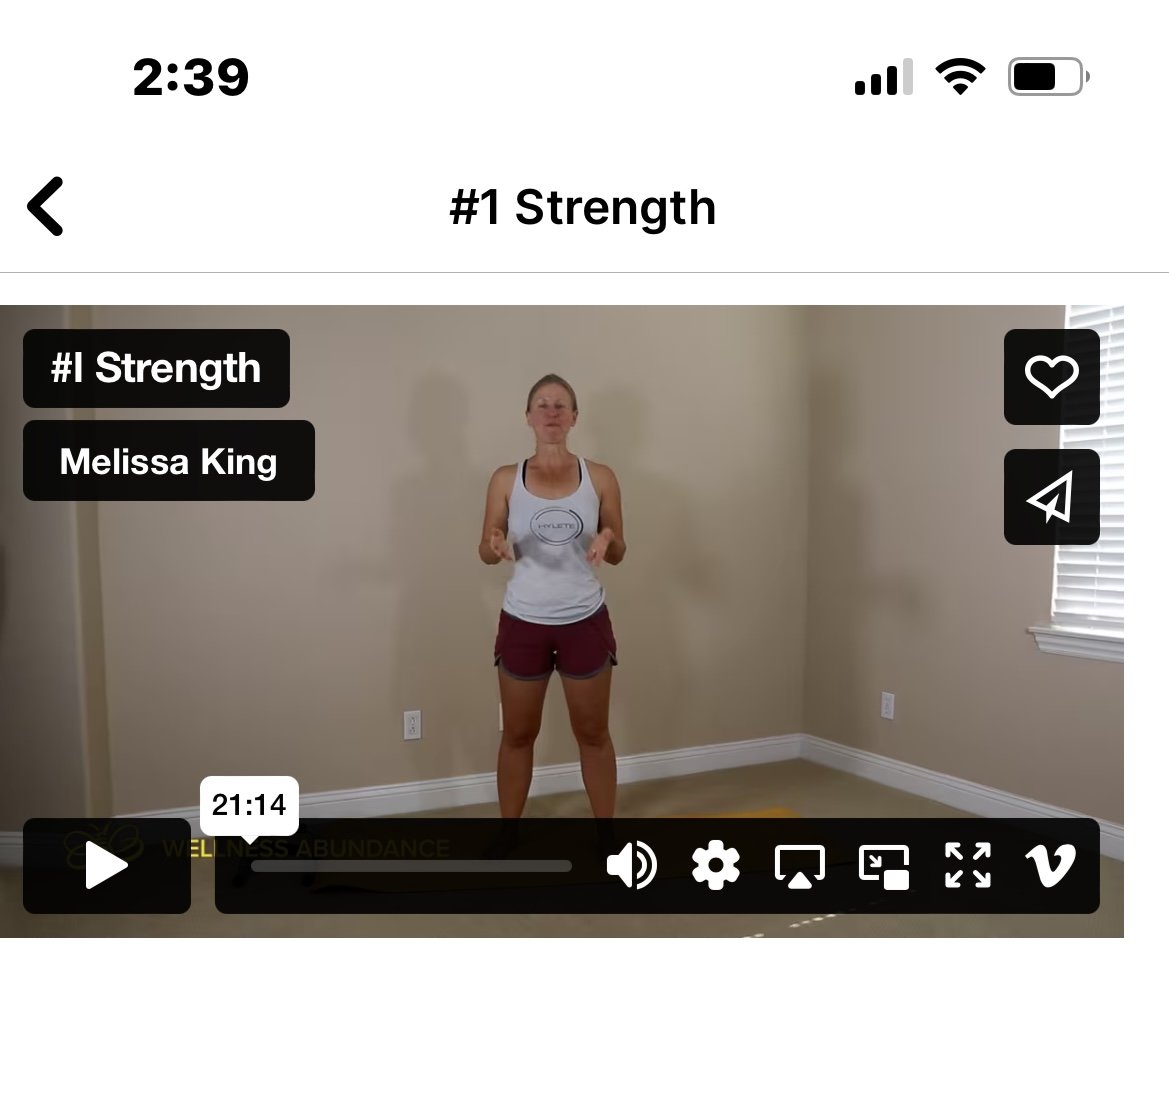 Strenghtworkout1.jpg